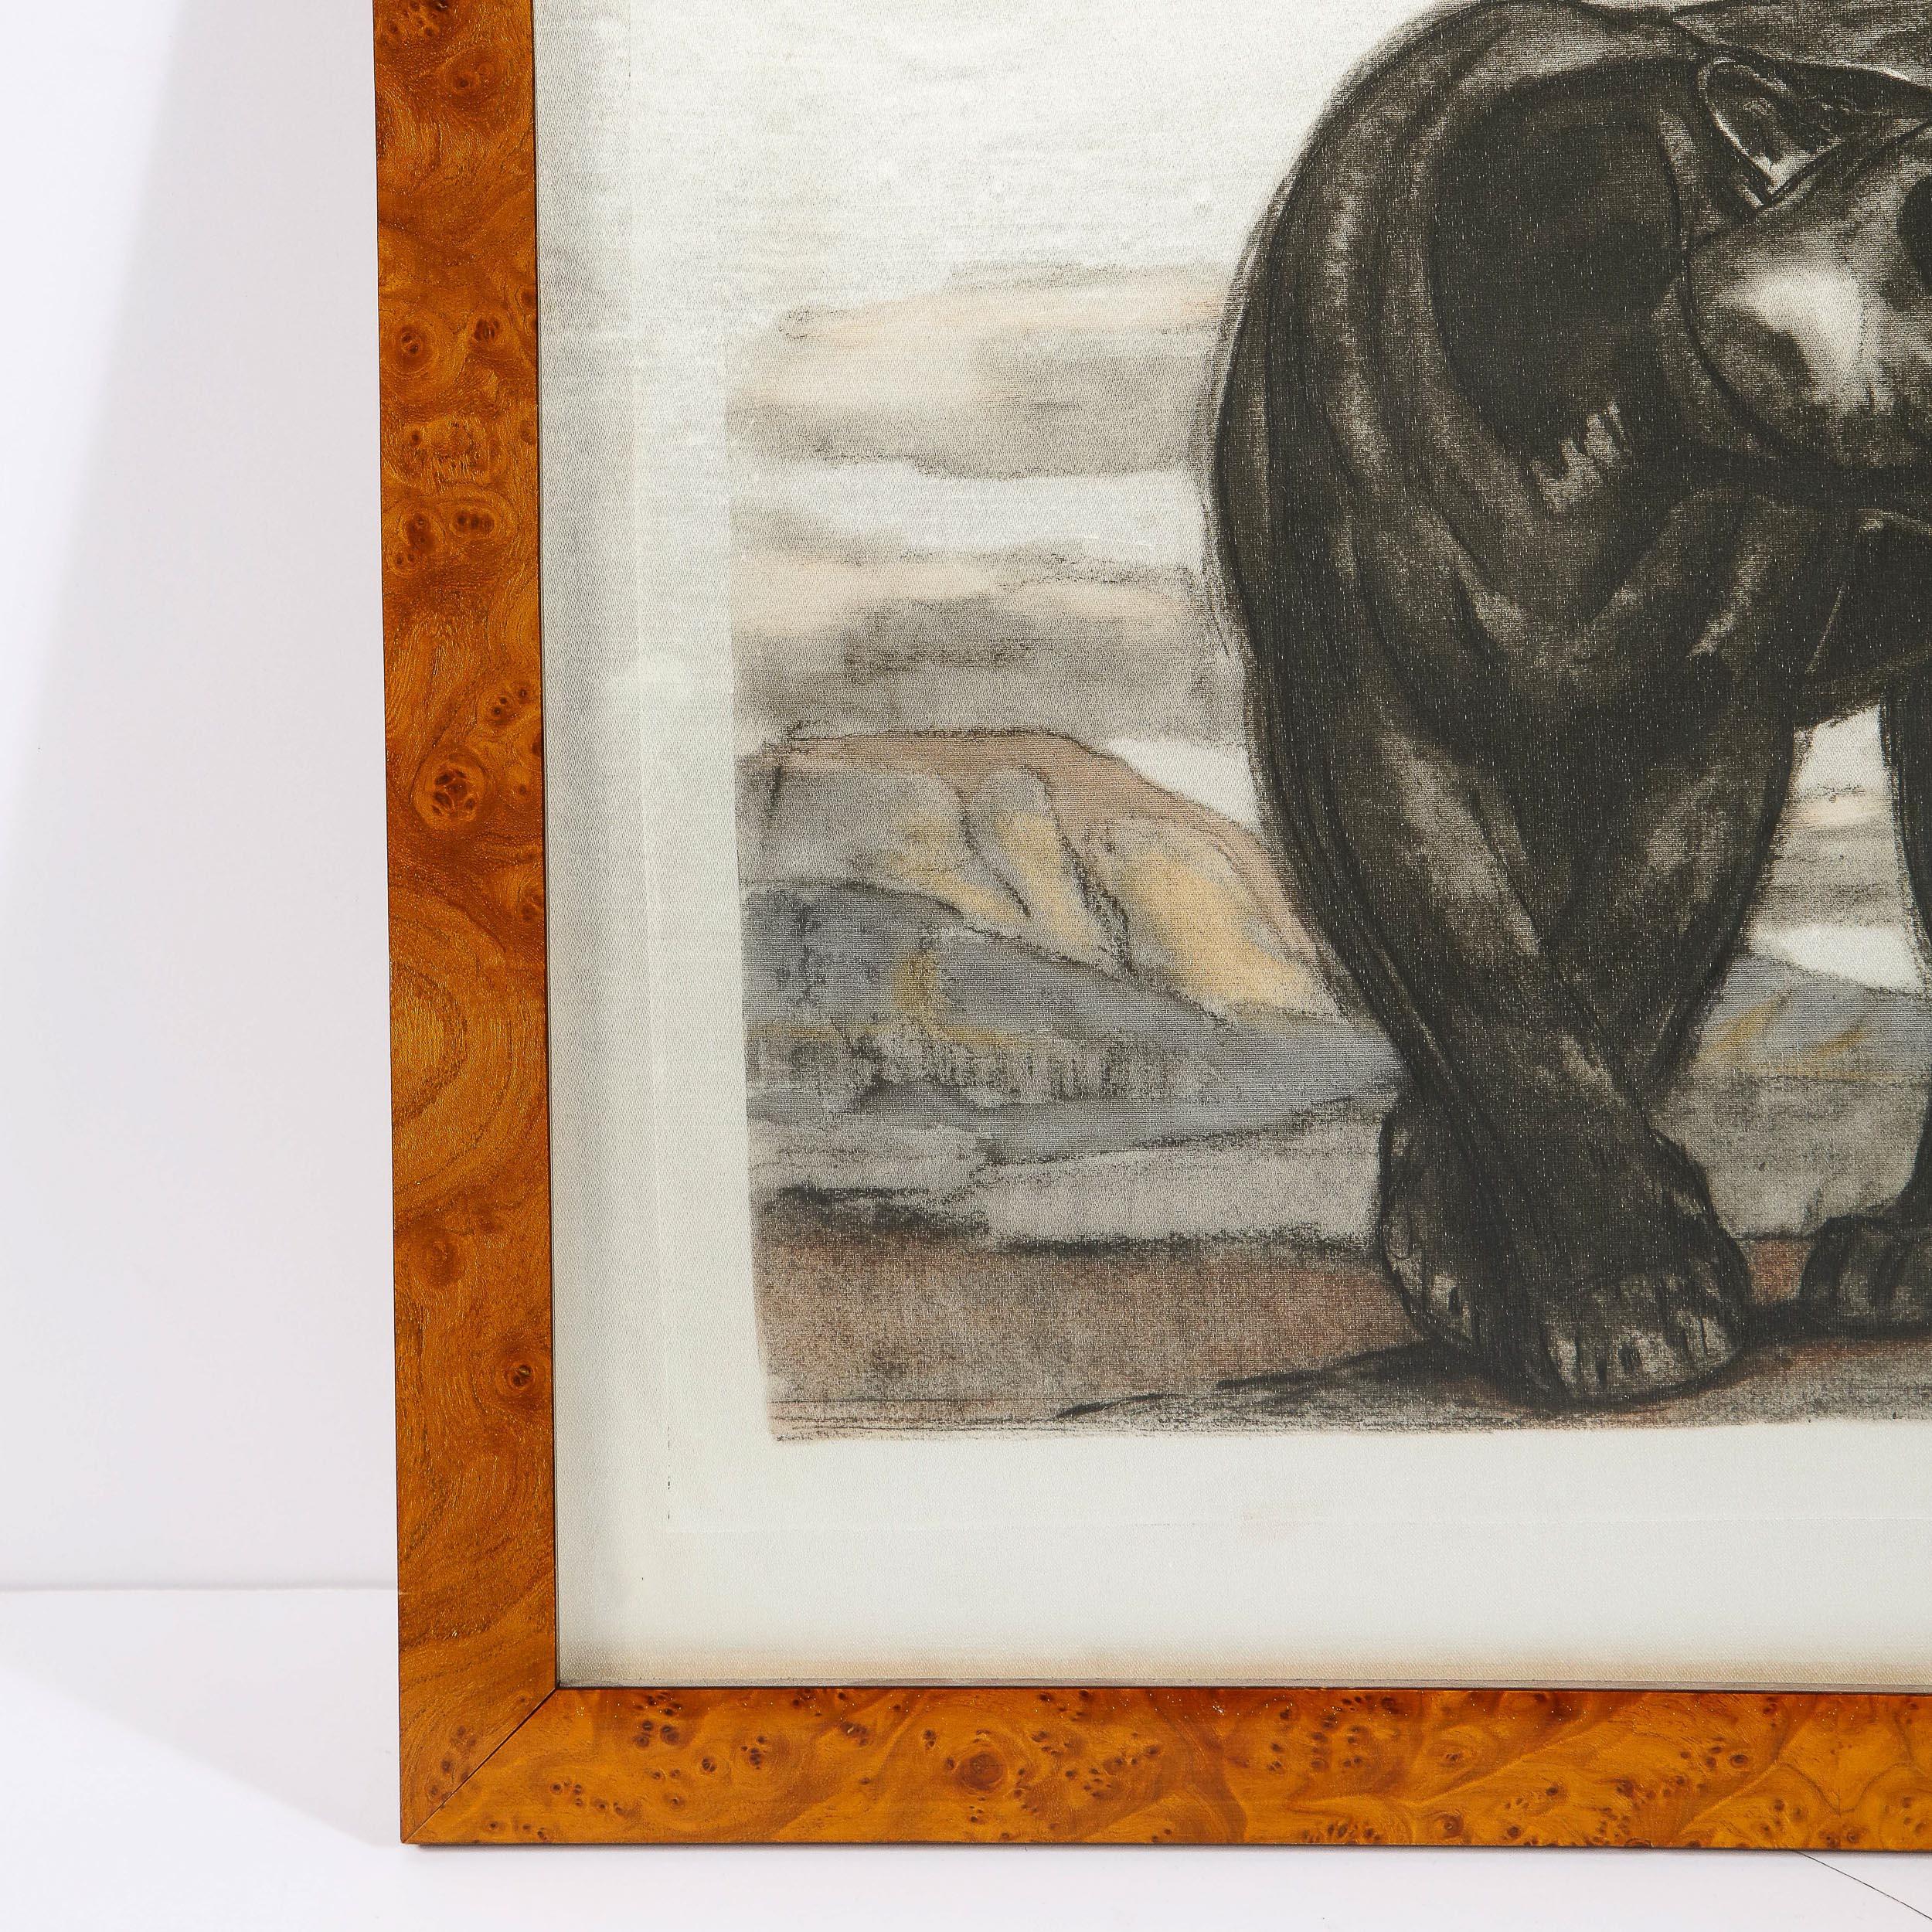 This original etching was executed by the master printmaker Paul Jouve in France, circa 1925. It offers a strolling black panther against a background of rolling hills in grisaille tones. With its beautiful detailing and iconically Art Deco